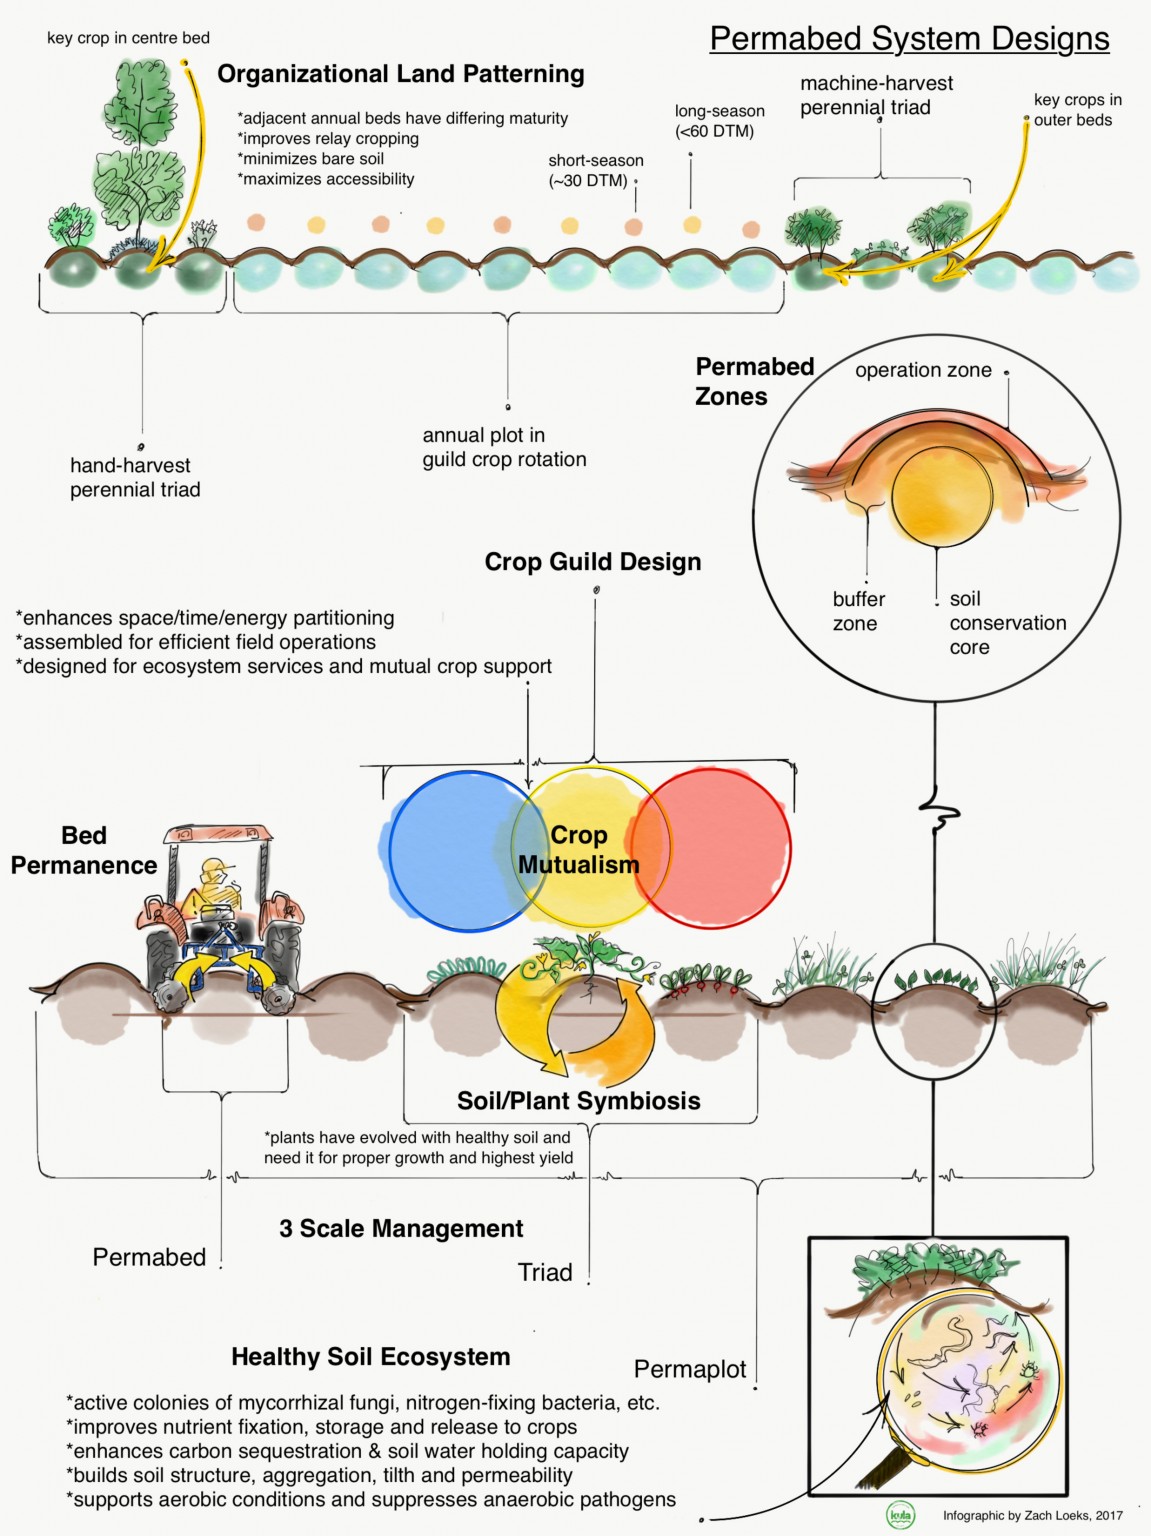 transitioning-to-a-permaculture-market-garden